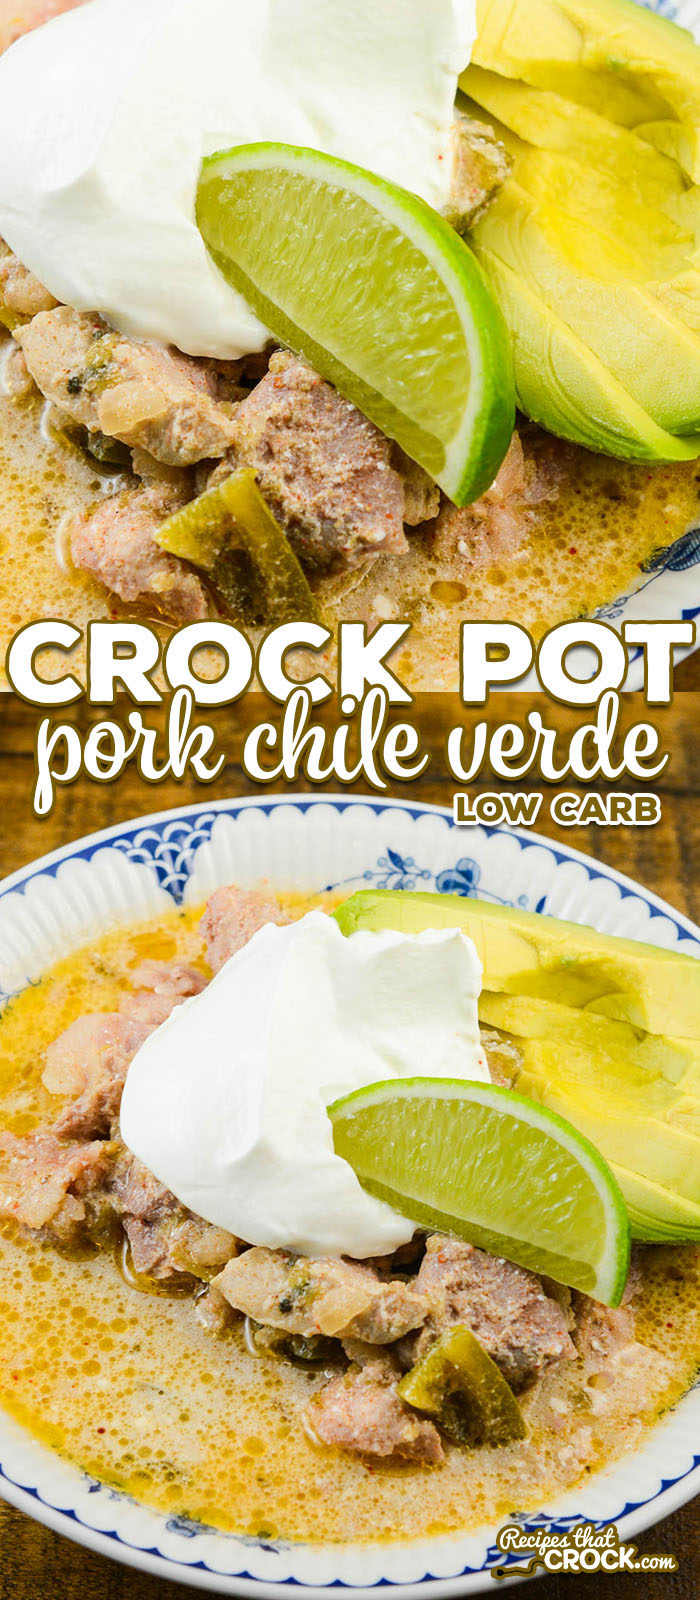 This Crock Pot Chile Verde Recipe has become a family favorite in our house. This slow cooker recipe can be served up as a stew or spooned into tortillas for a delicious spin on taco night.